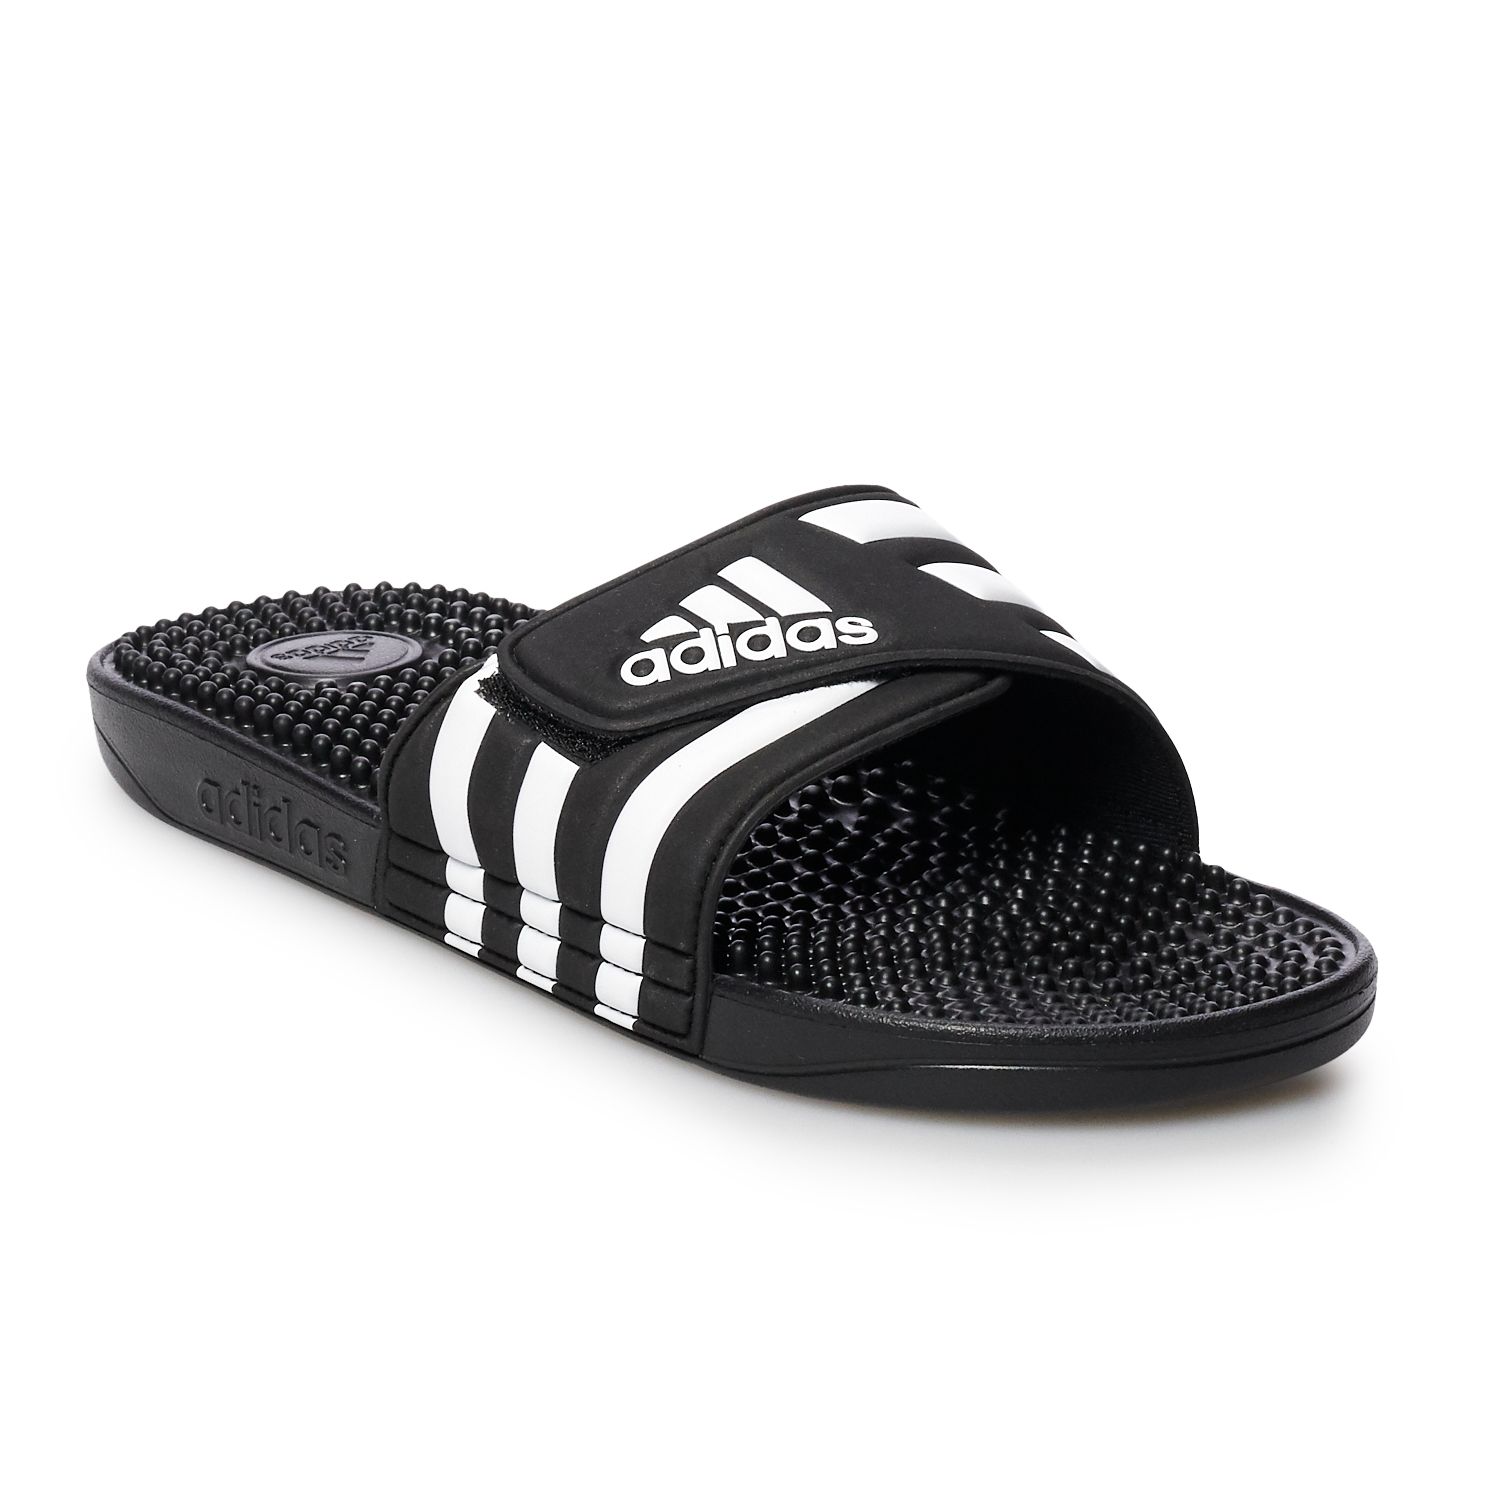 adidas Sandals and Slides: Step into